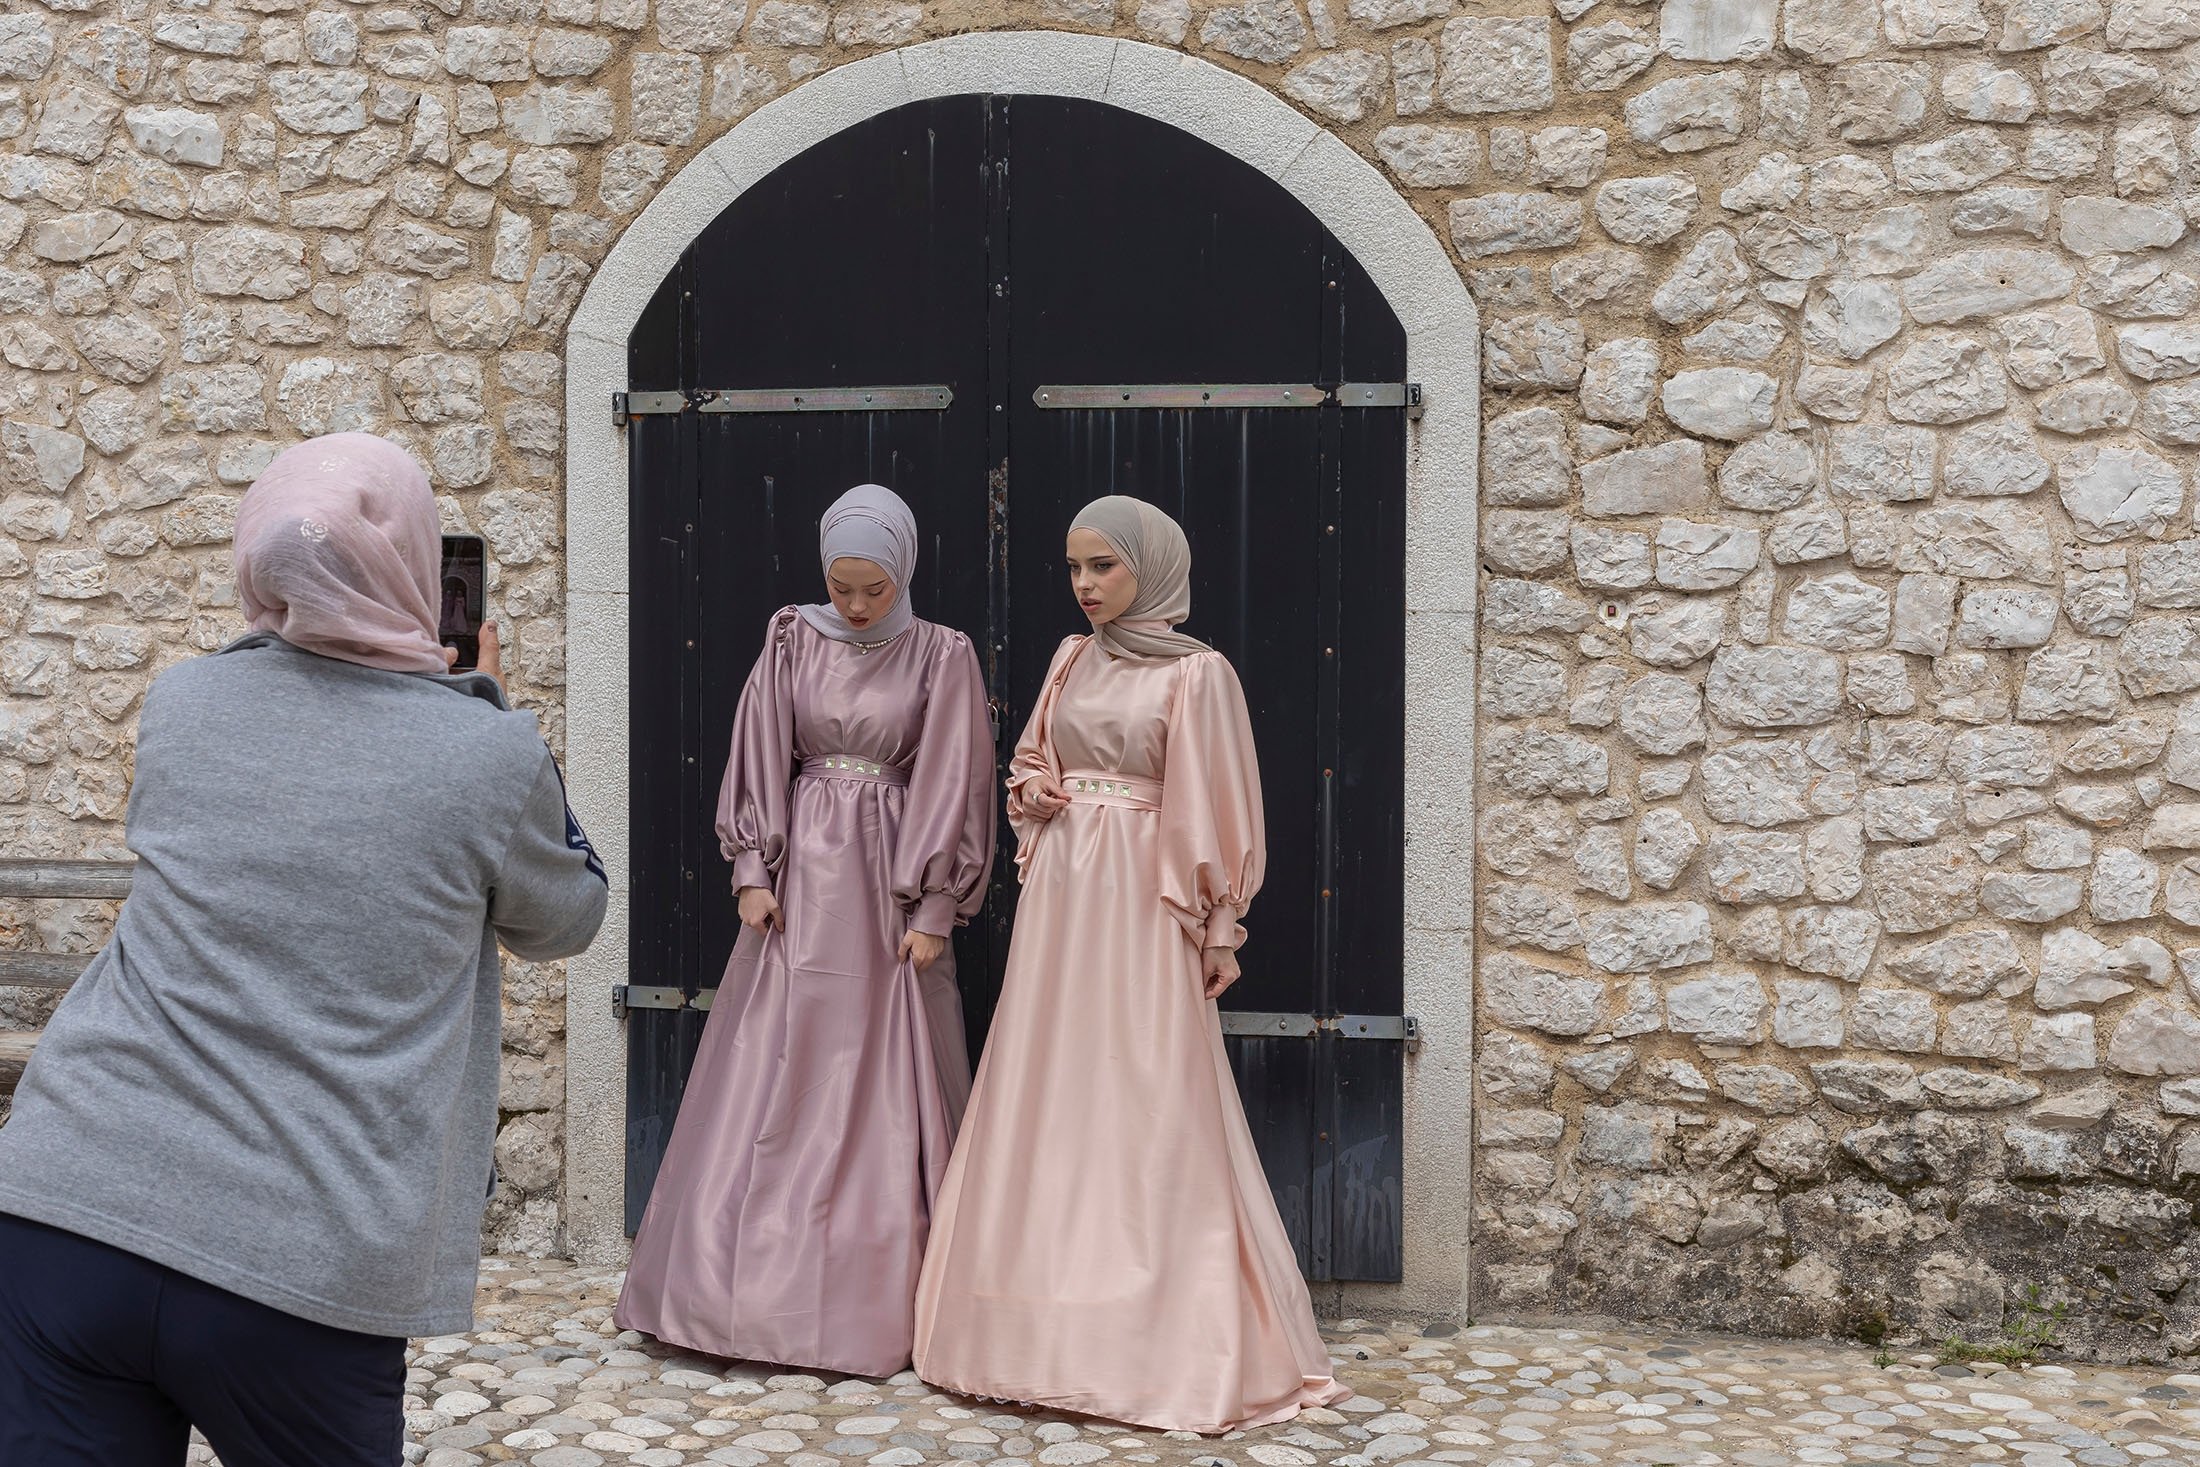 Two females photograph their outfits to wear for Eid al-Fitr, in Ston, Bosnia-Herzegovina, April 23, 2022. (Shutterstock Photo)